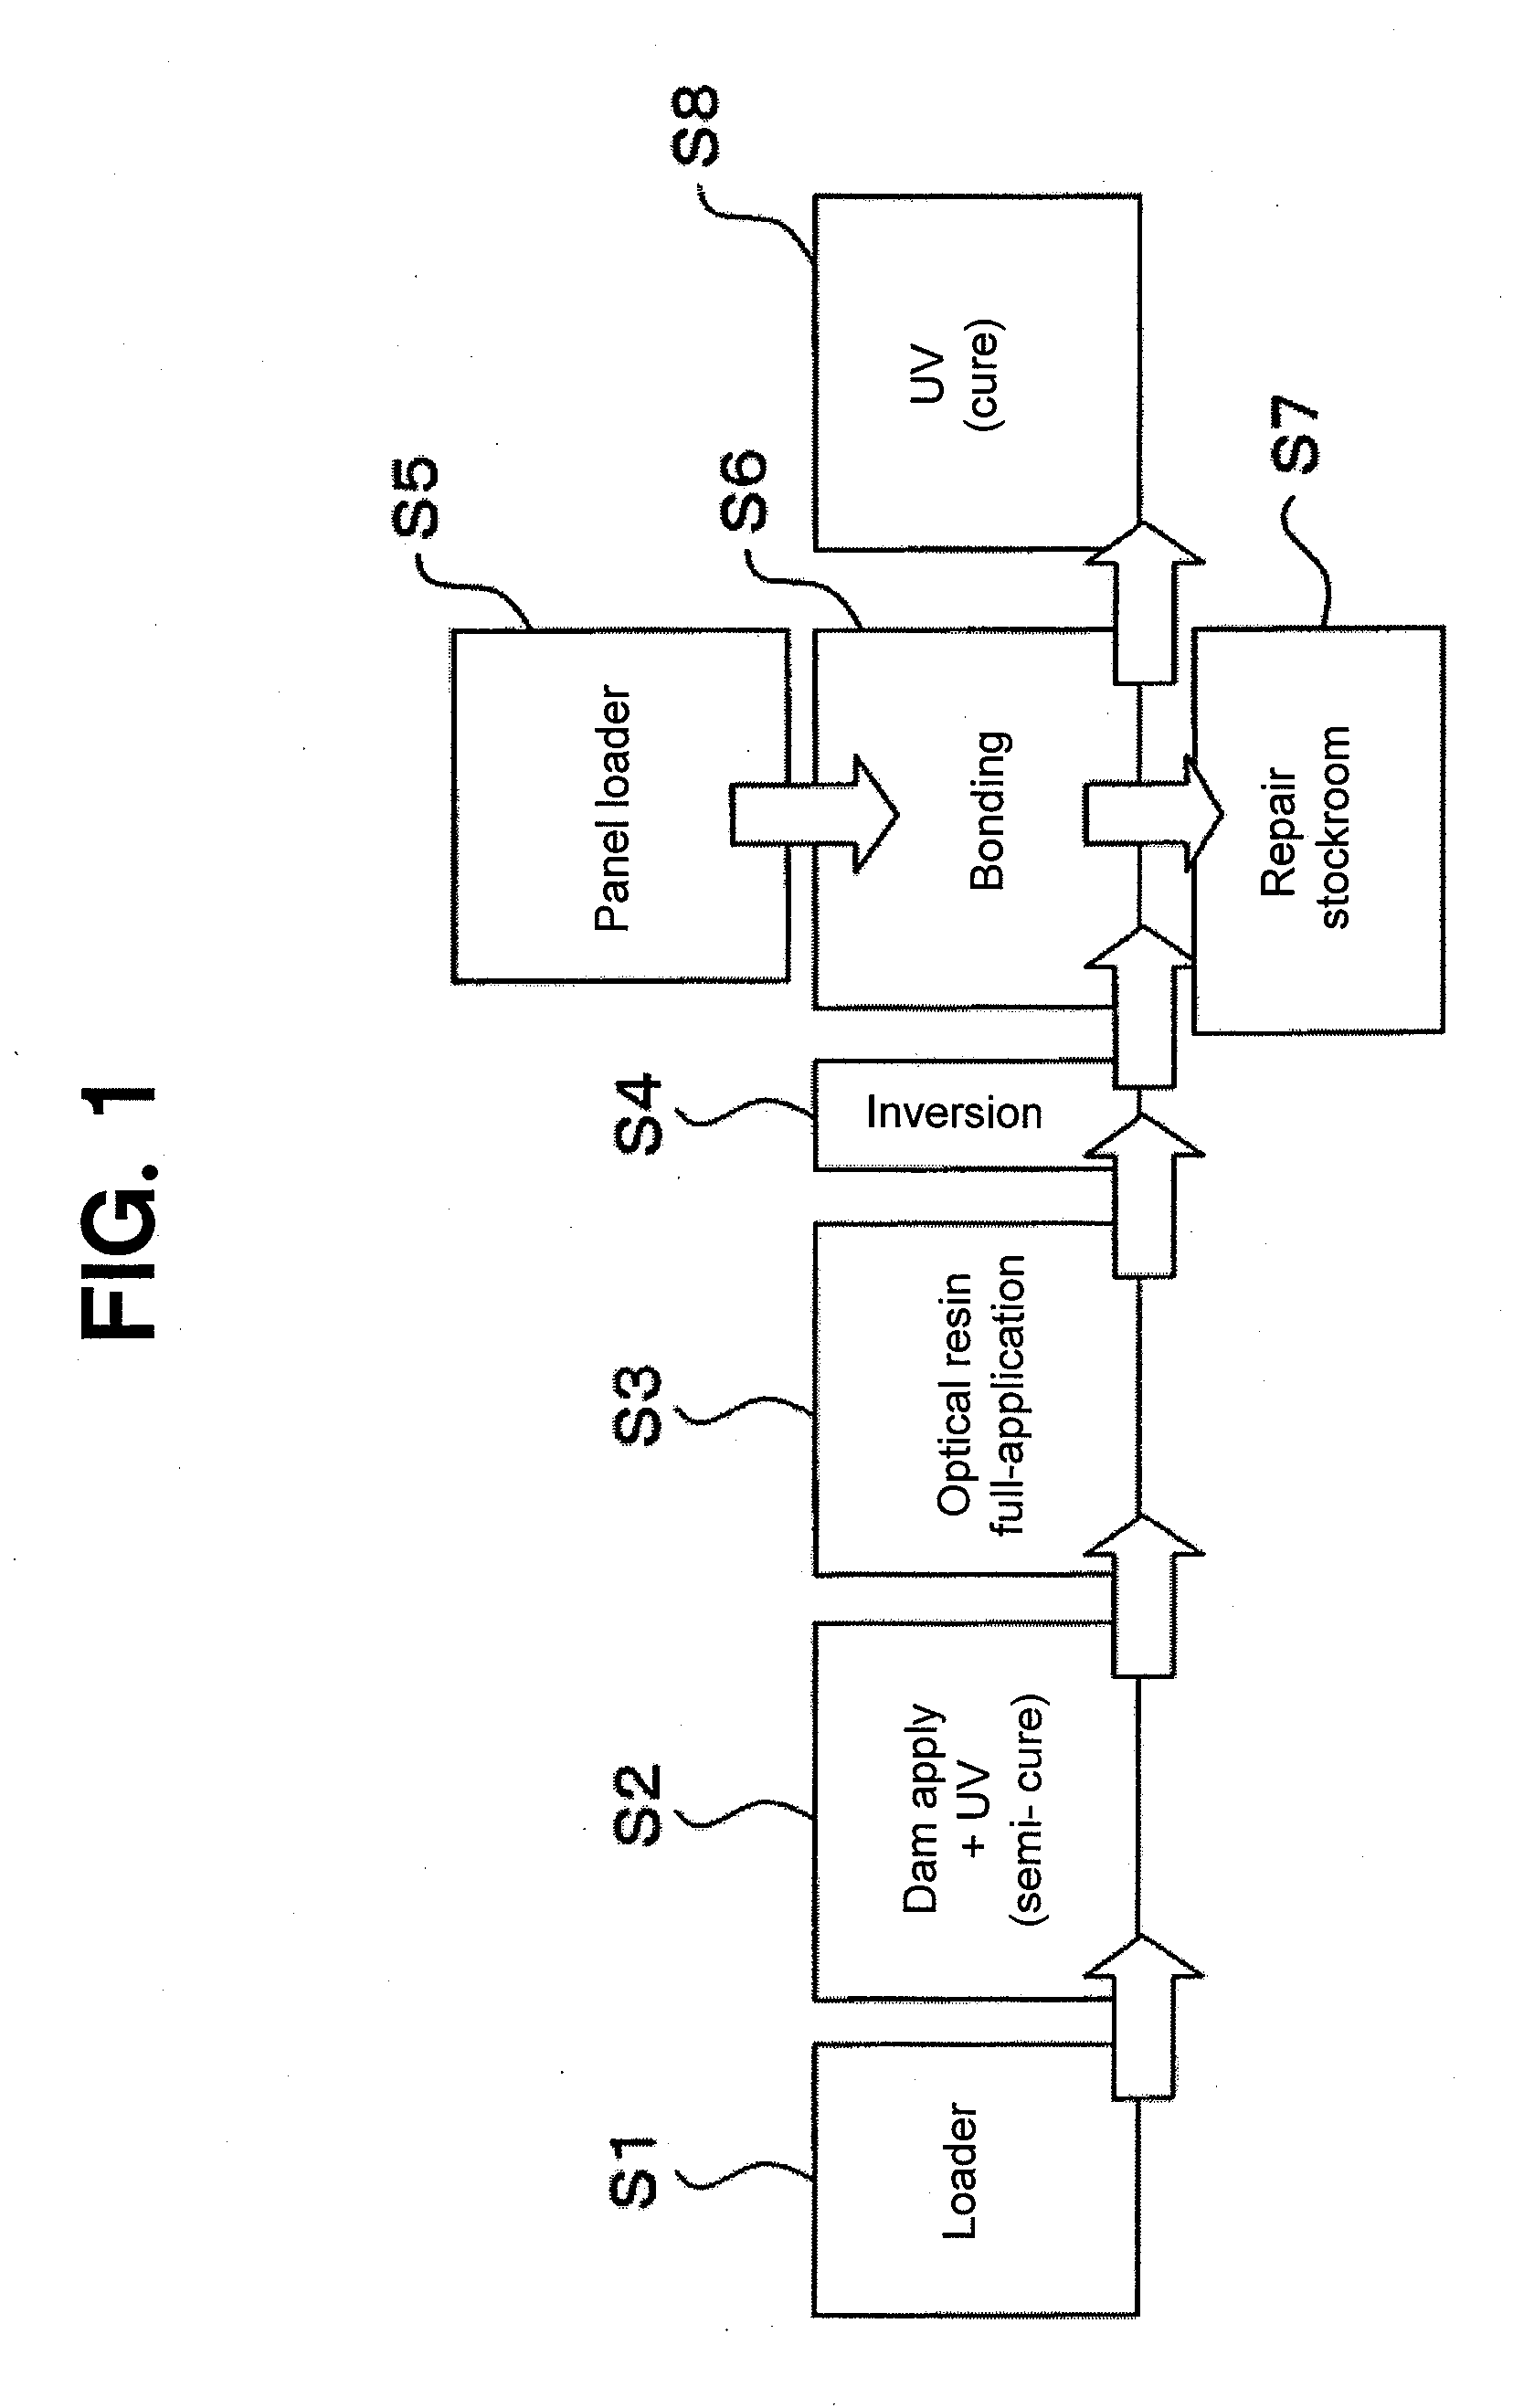 Method and apparatus for manufacturing a liquid crystal component